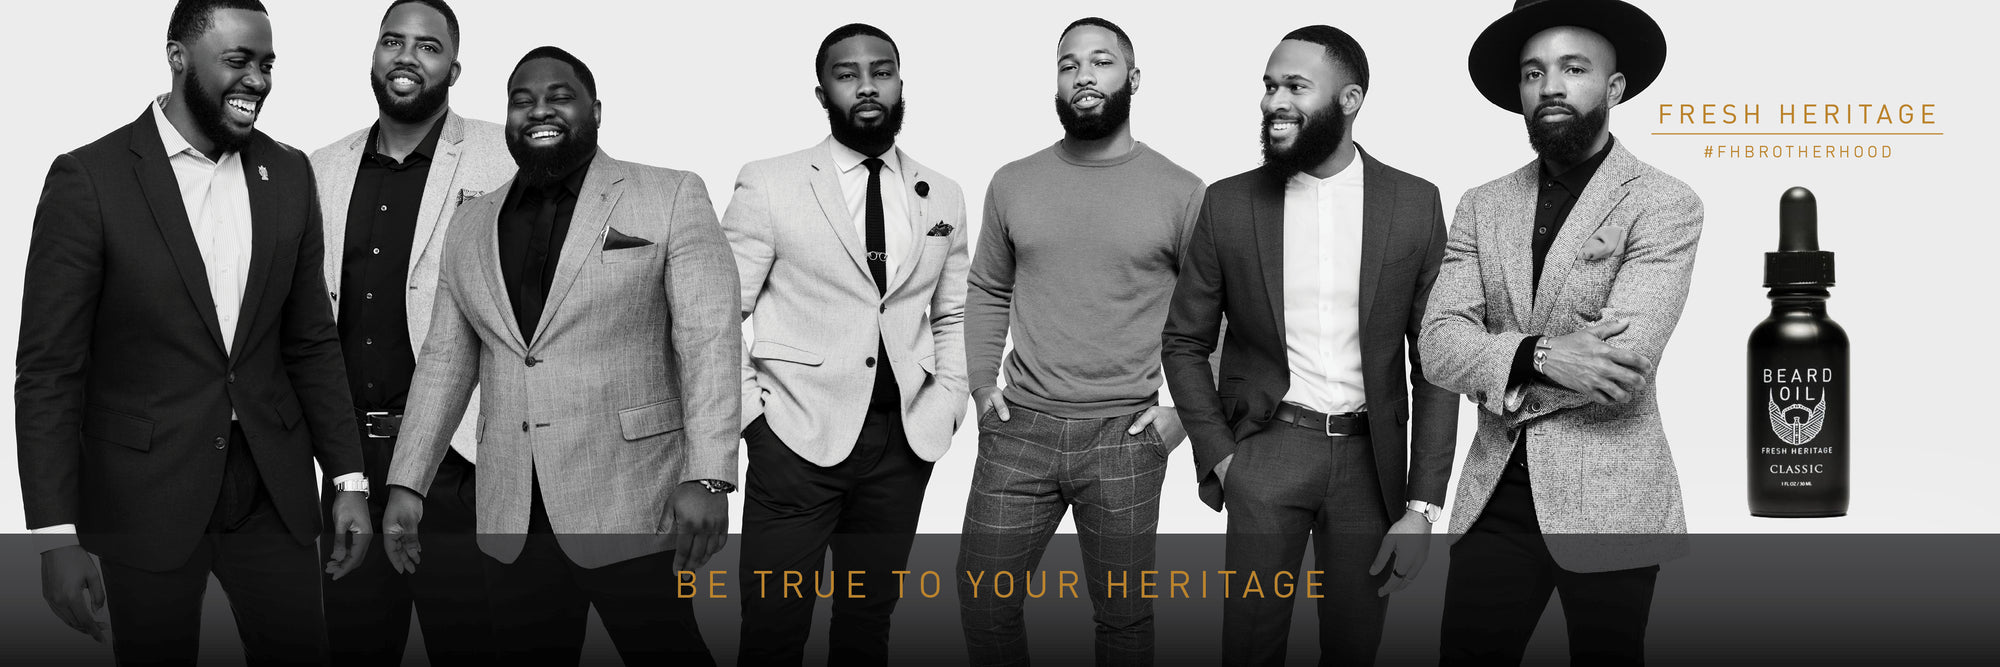 Black Fraternities: It’s More Than Just Stepping